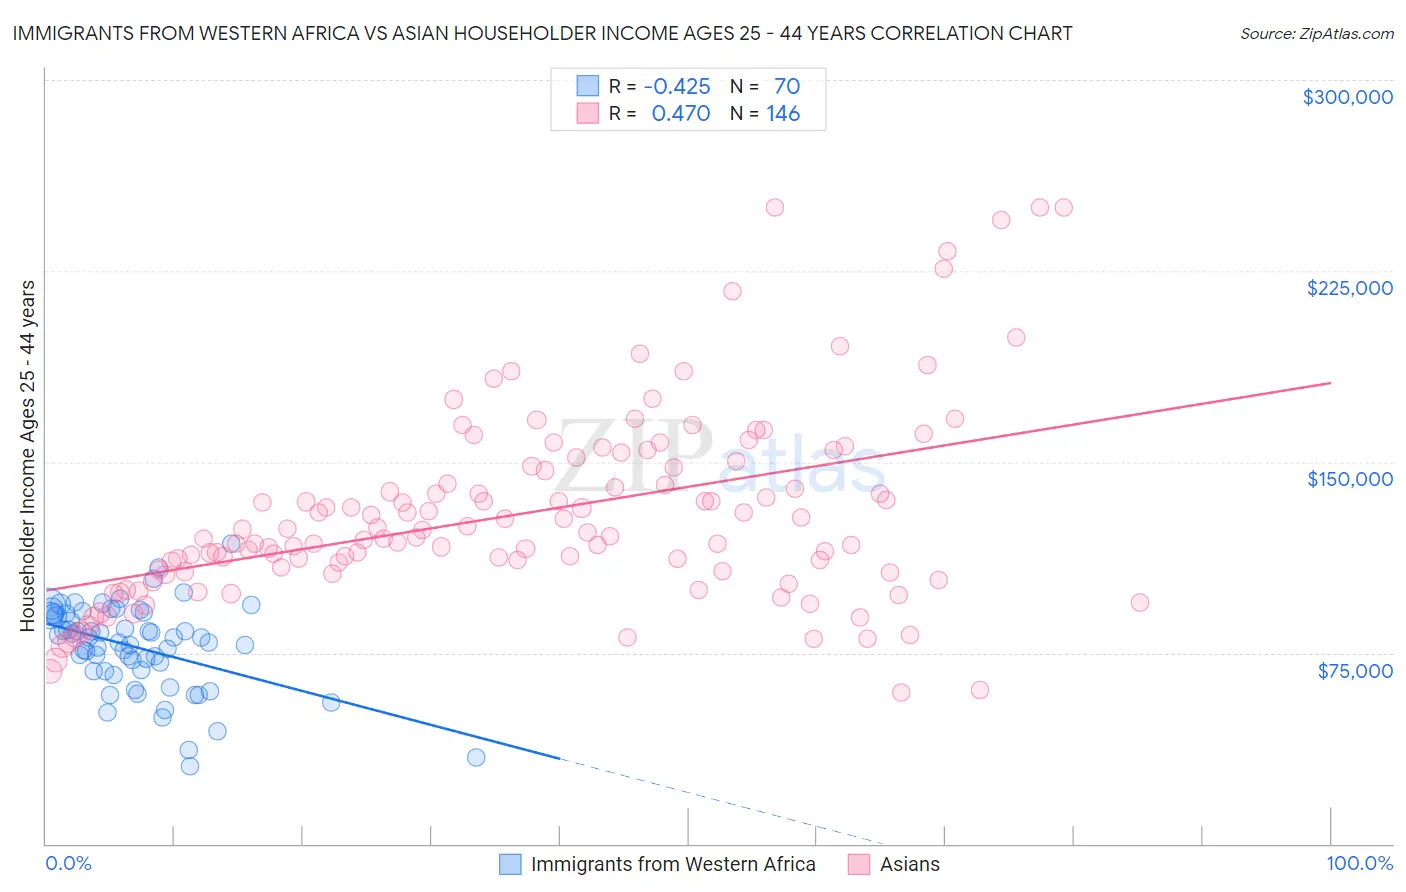 Immigrants from Western Africa vs Asian Householder Income Ages 25 - 44 years